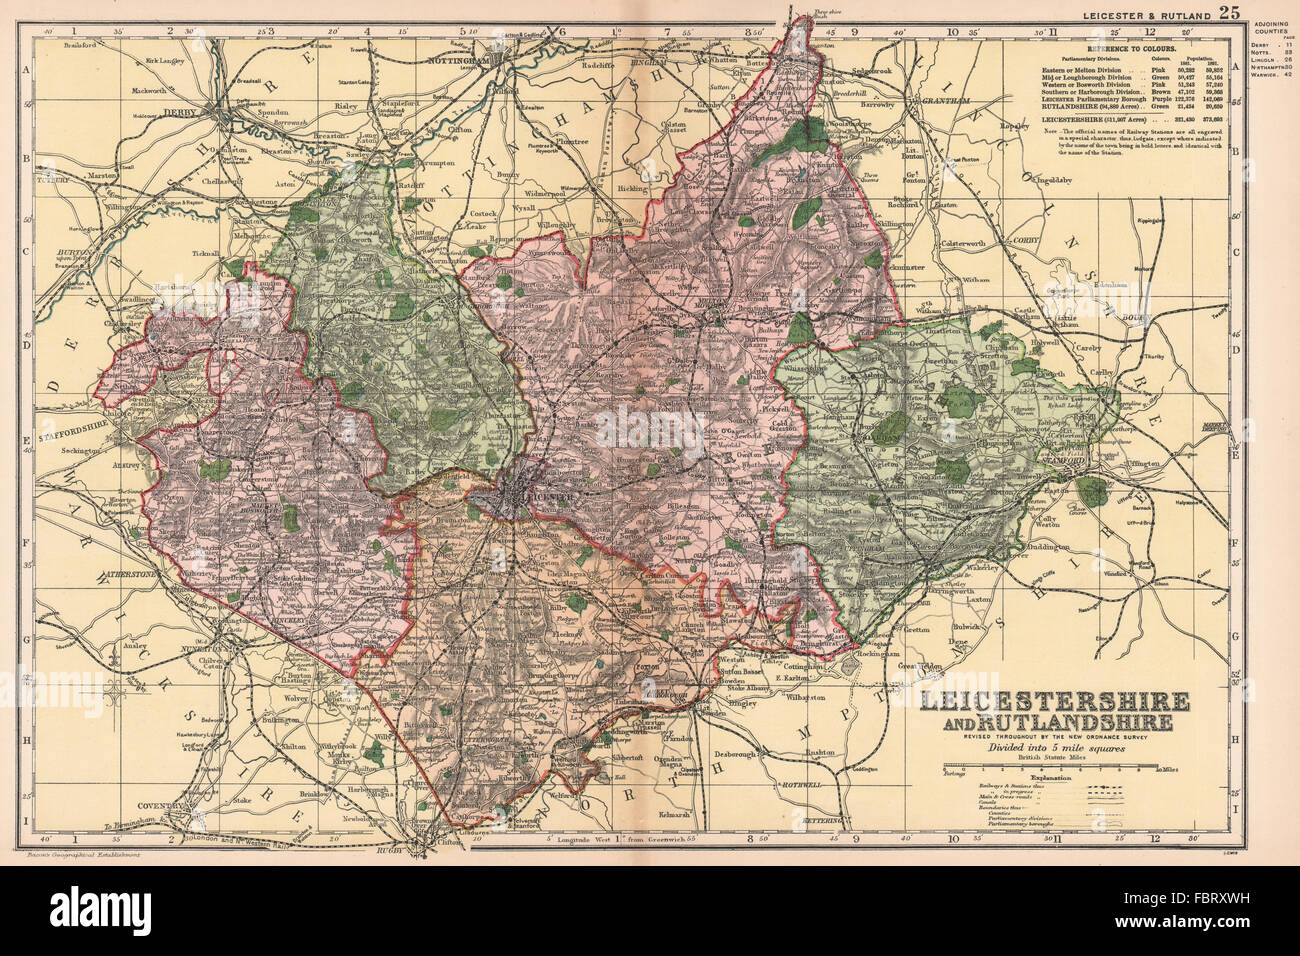 LEICESTERSHIRE AND RUTLANDSHIRE. Parliamentary divisions & parks. BACON 1901 map Stock Photo